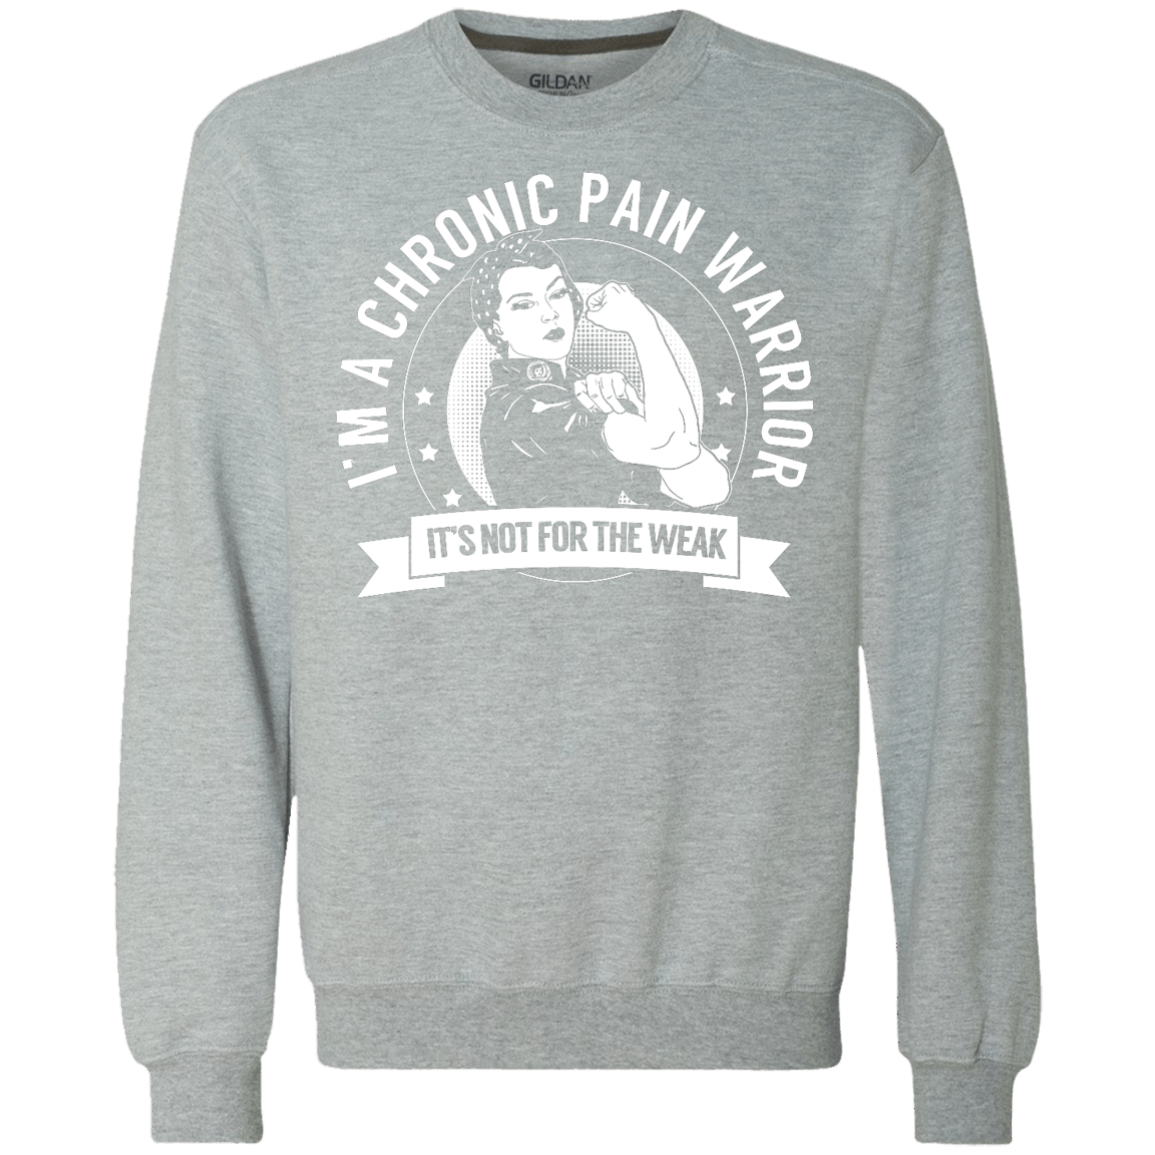 Chronic Pain Warrior Not For The Weak Crewneck Sweatshirt 9 oz. - The Unchargeables